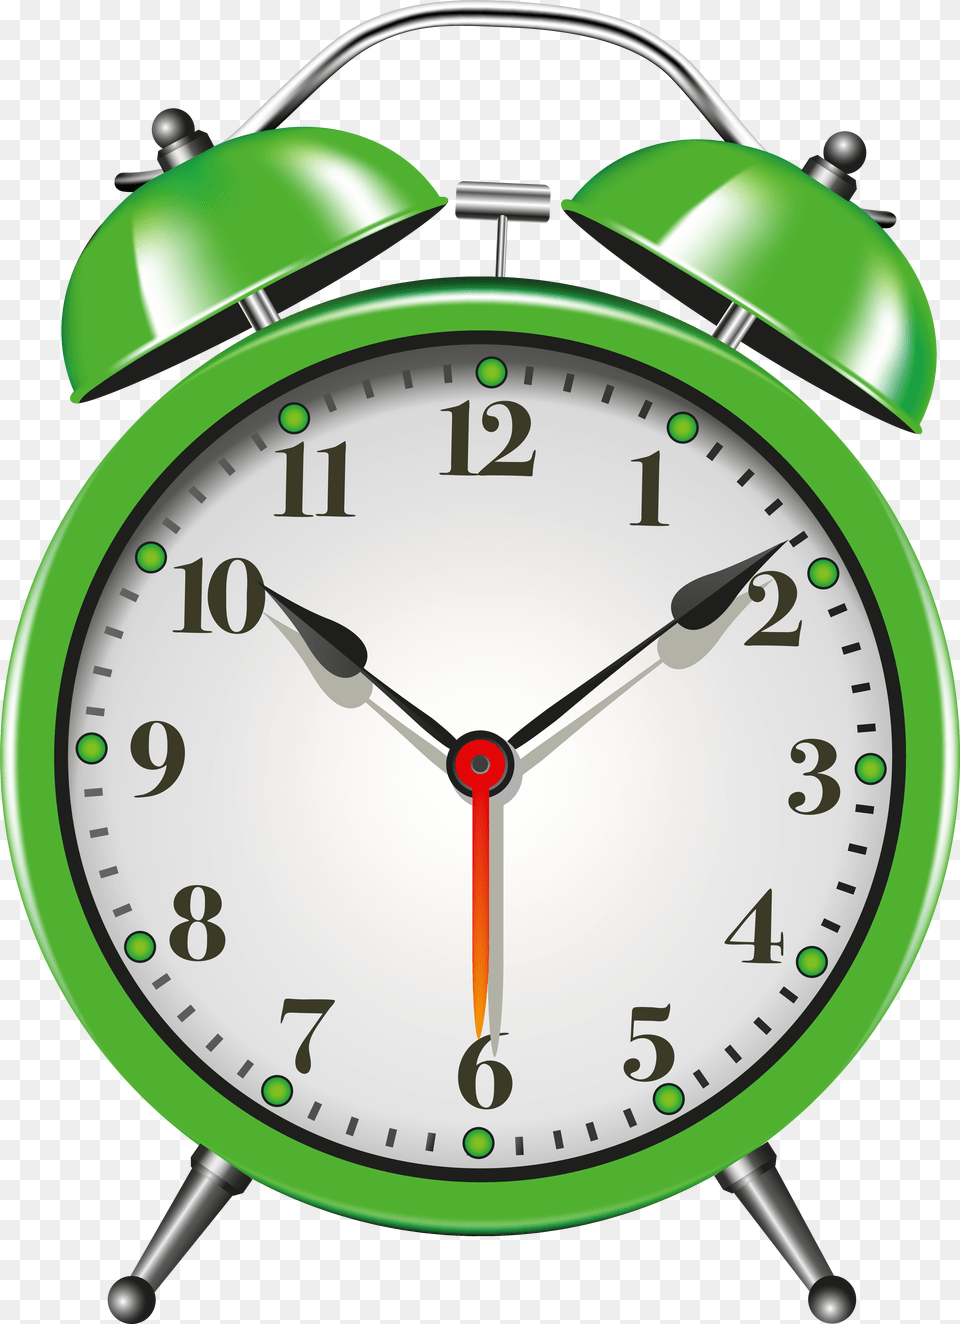 Green Alarm Clock Clip Art Different Types Of Watches And Clocks Png